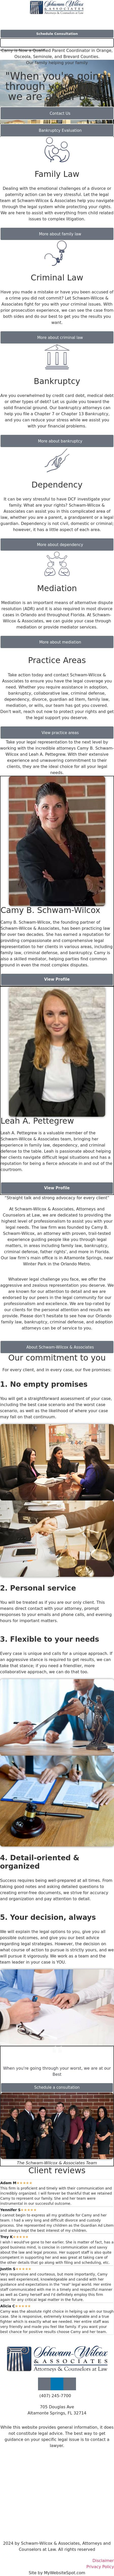 Schwam-Wilcox & Associates, Attorneys and Counselors at Law - Deltona FL Lawyers